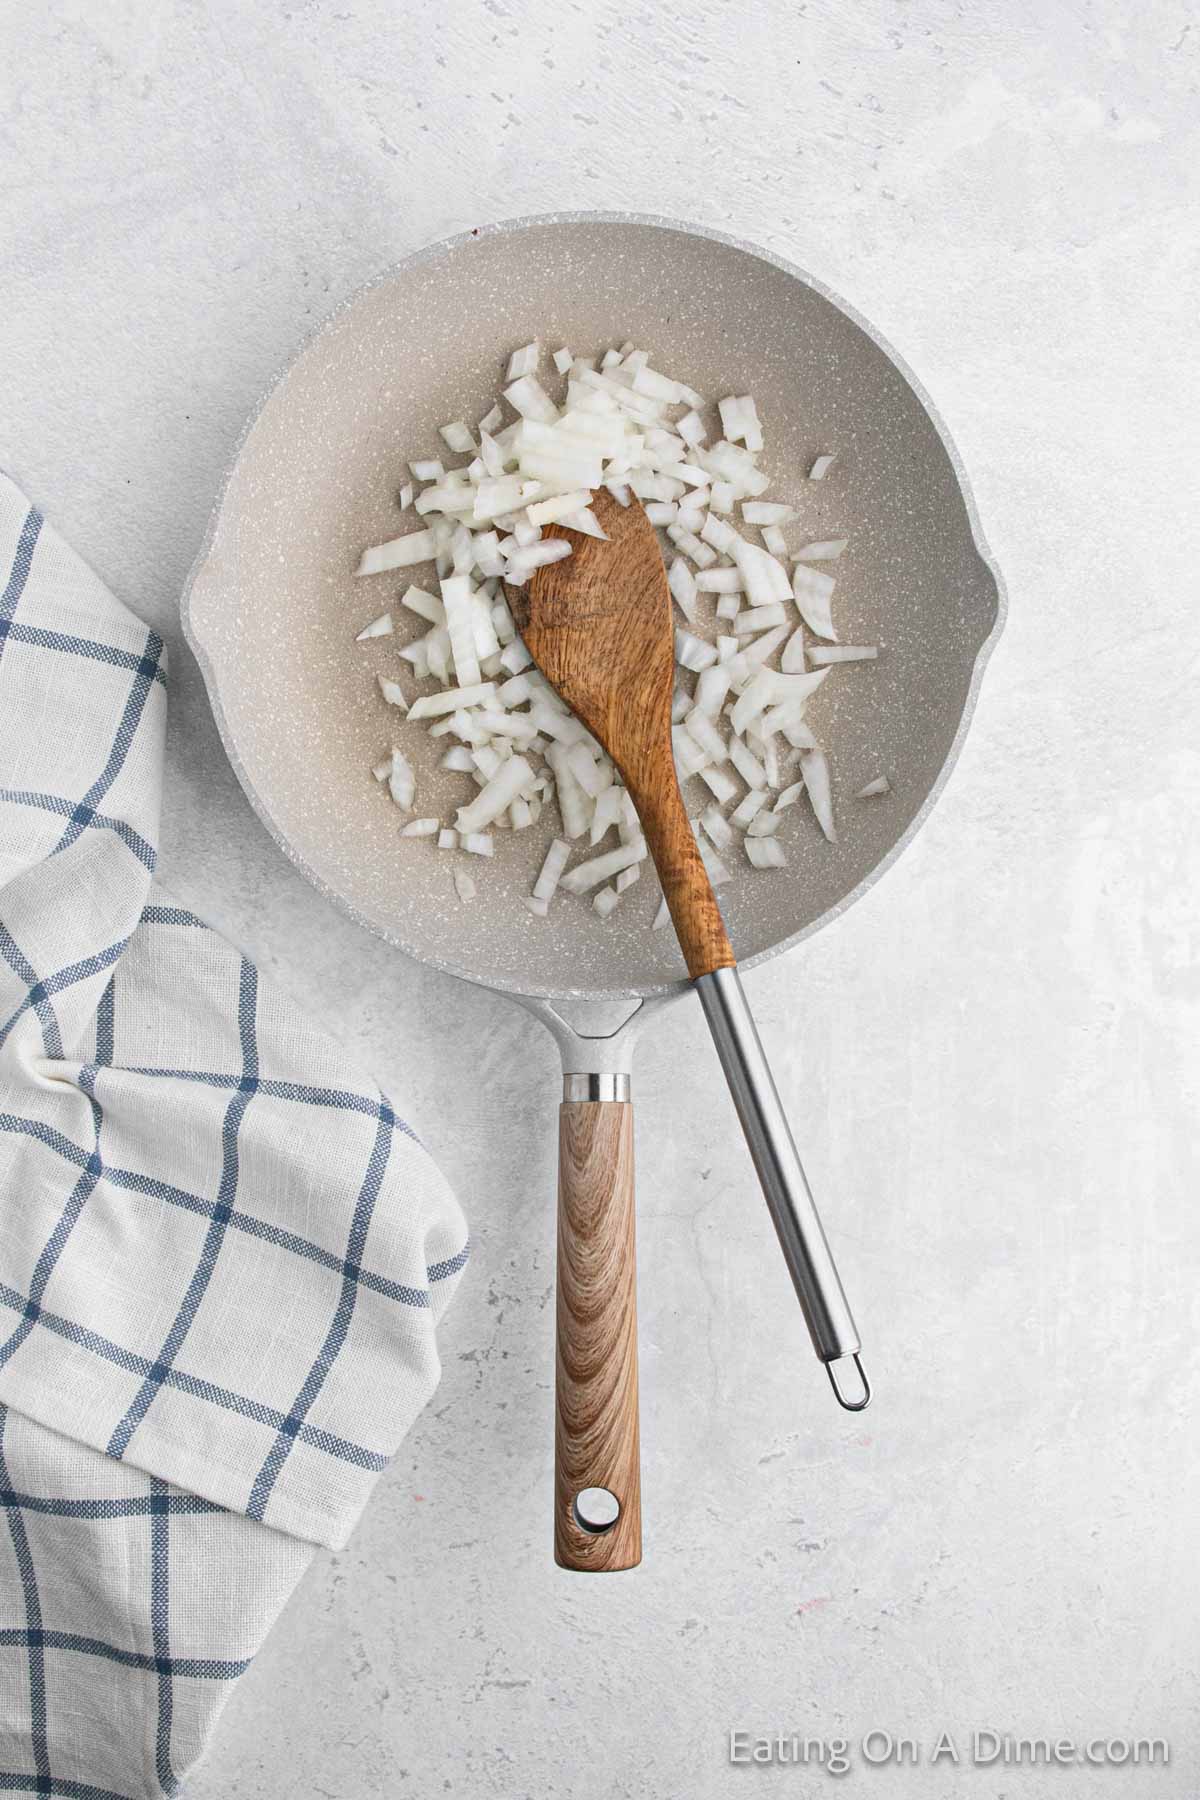 Cooking diced onions in a skillet with a wooden spoon